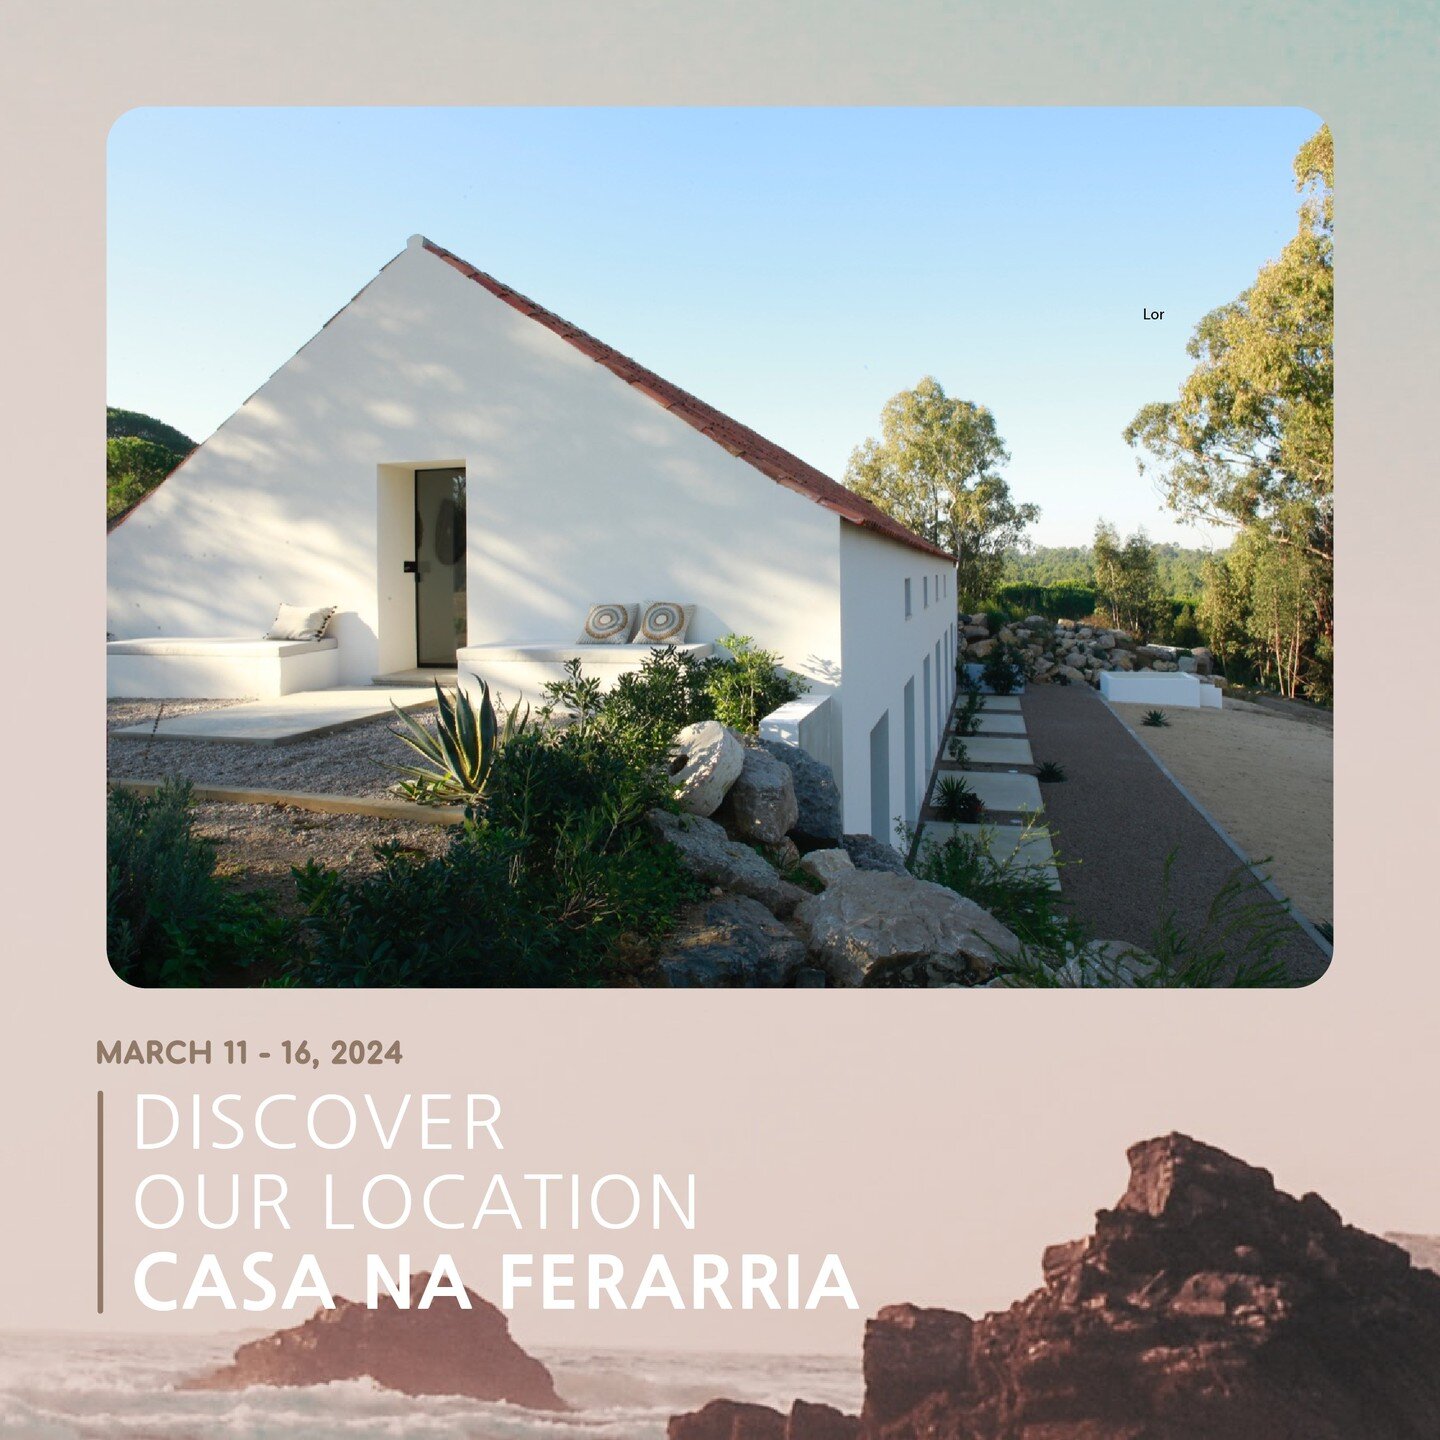 Join us and reset into a more balanced lifestyle. @casas_na_ferraria 
is a unique place half an hour south of
Lisbon. Where the air is filled with the
scent of eucalyptus. Stroll through the
surrounding forests and feel rejuvenated.